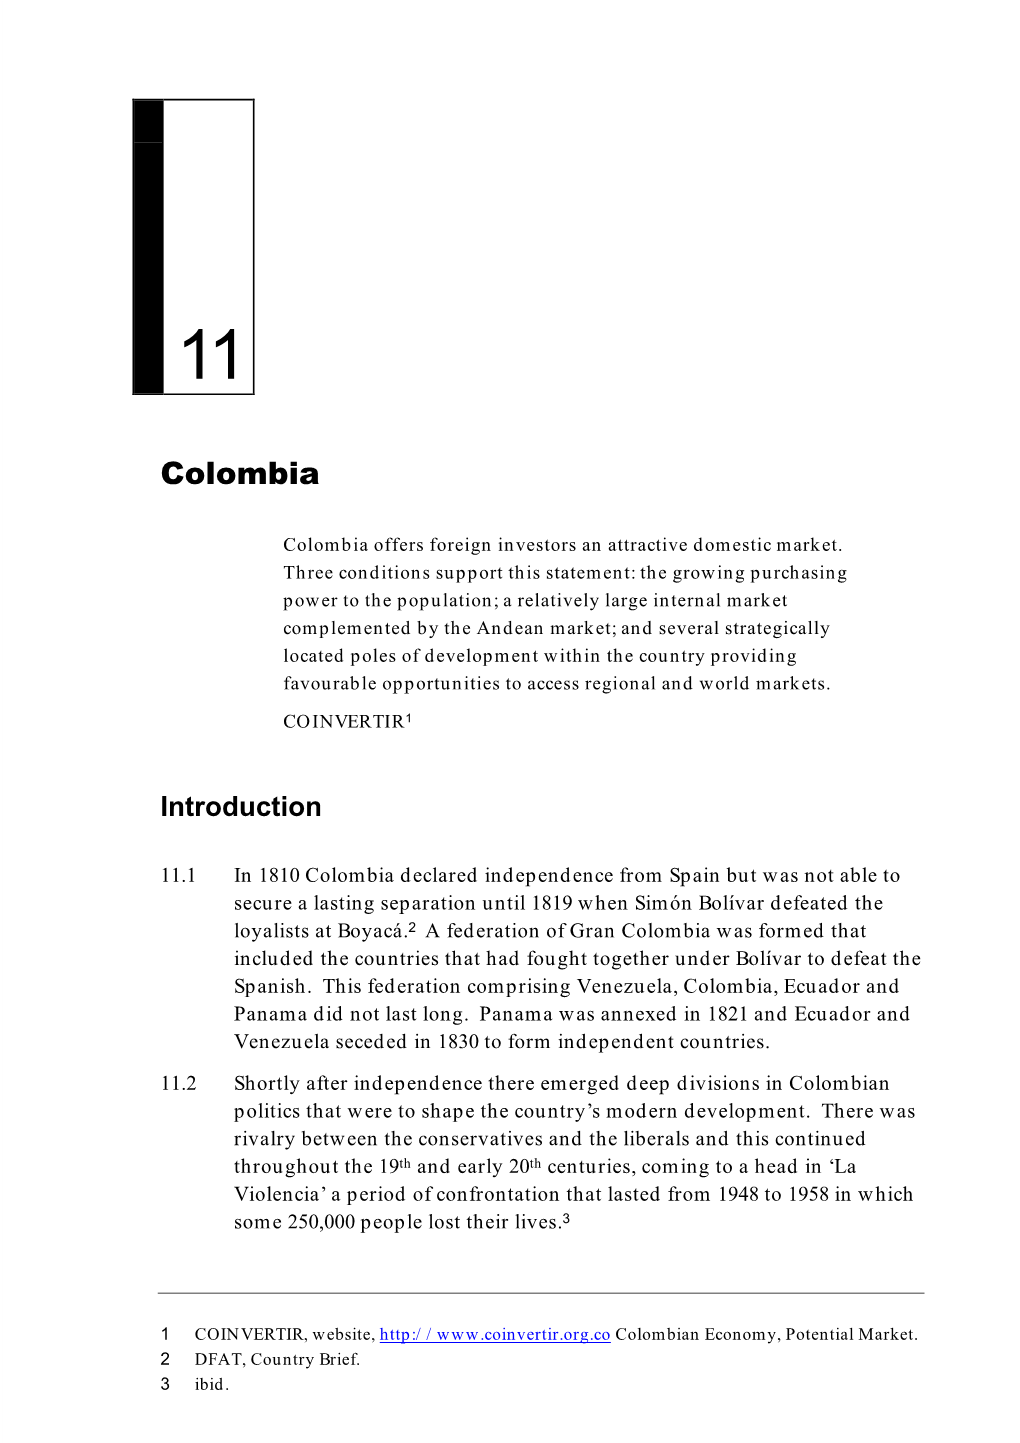 Chapter 11: Colombia